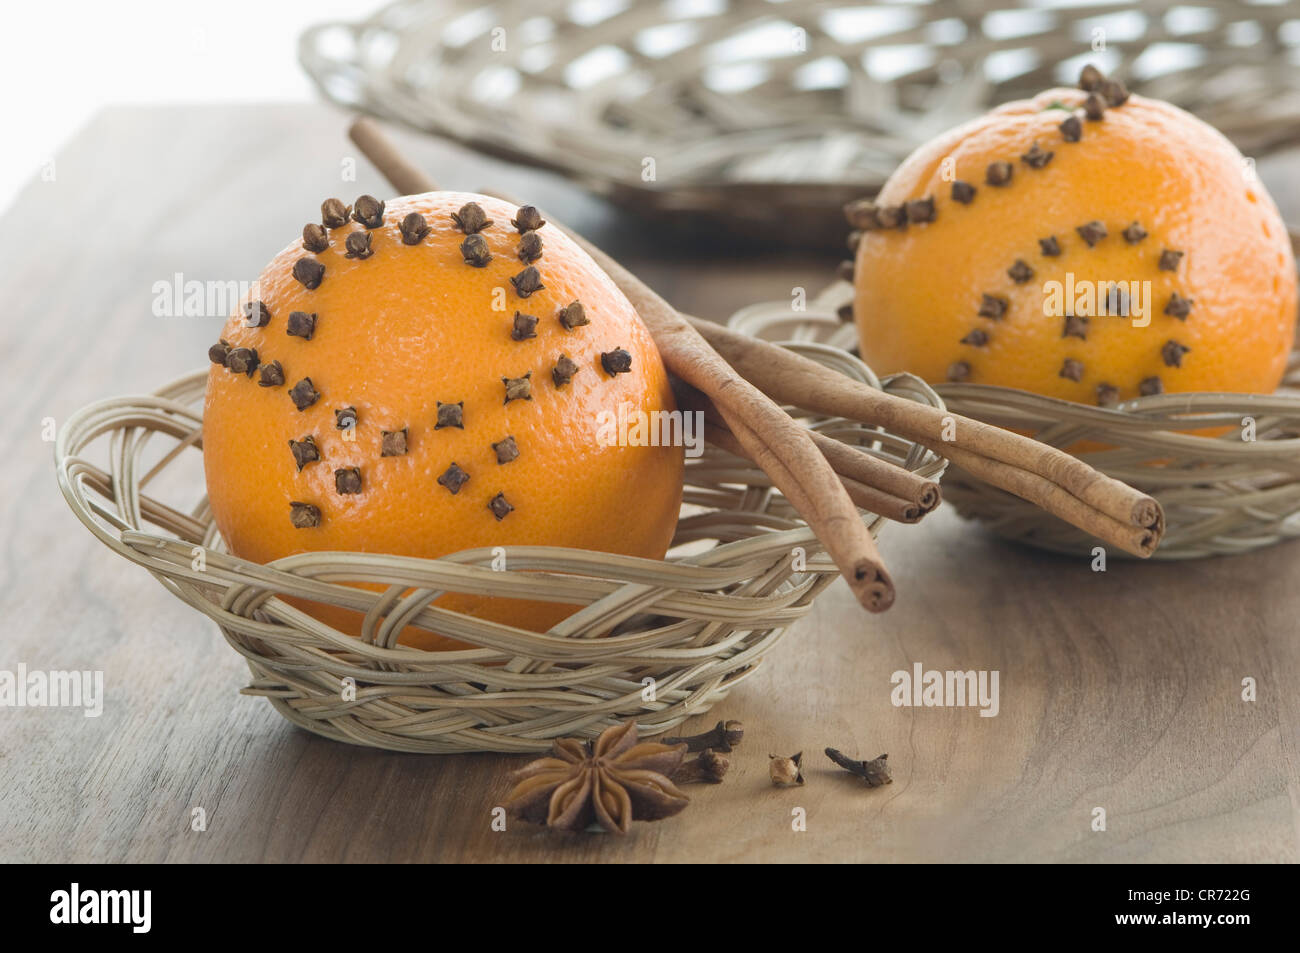 Orange studded with cloves and cinnamon stick in basket besides star anise on table Stock Photo